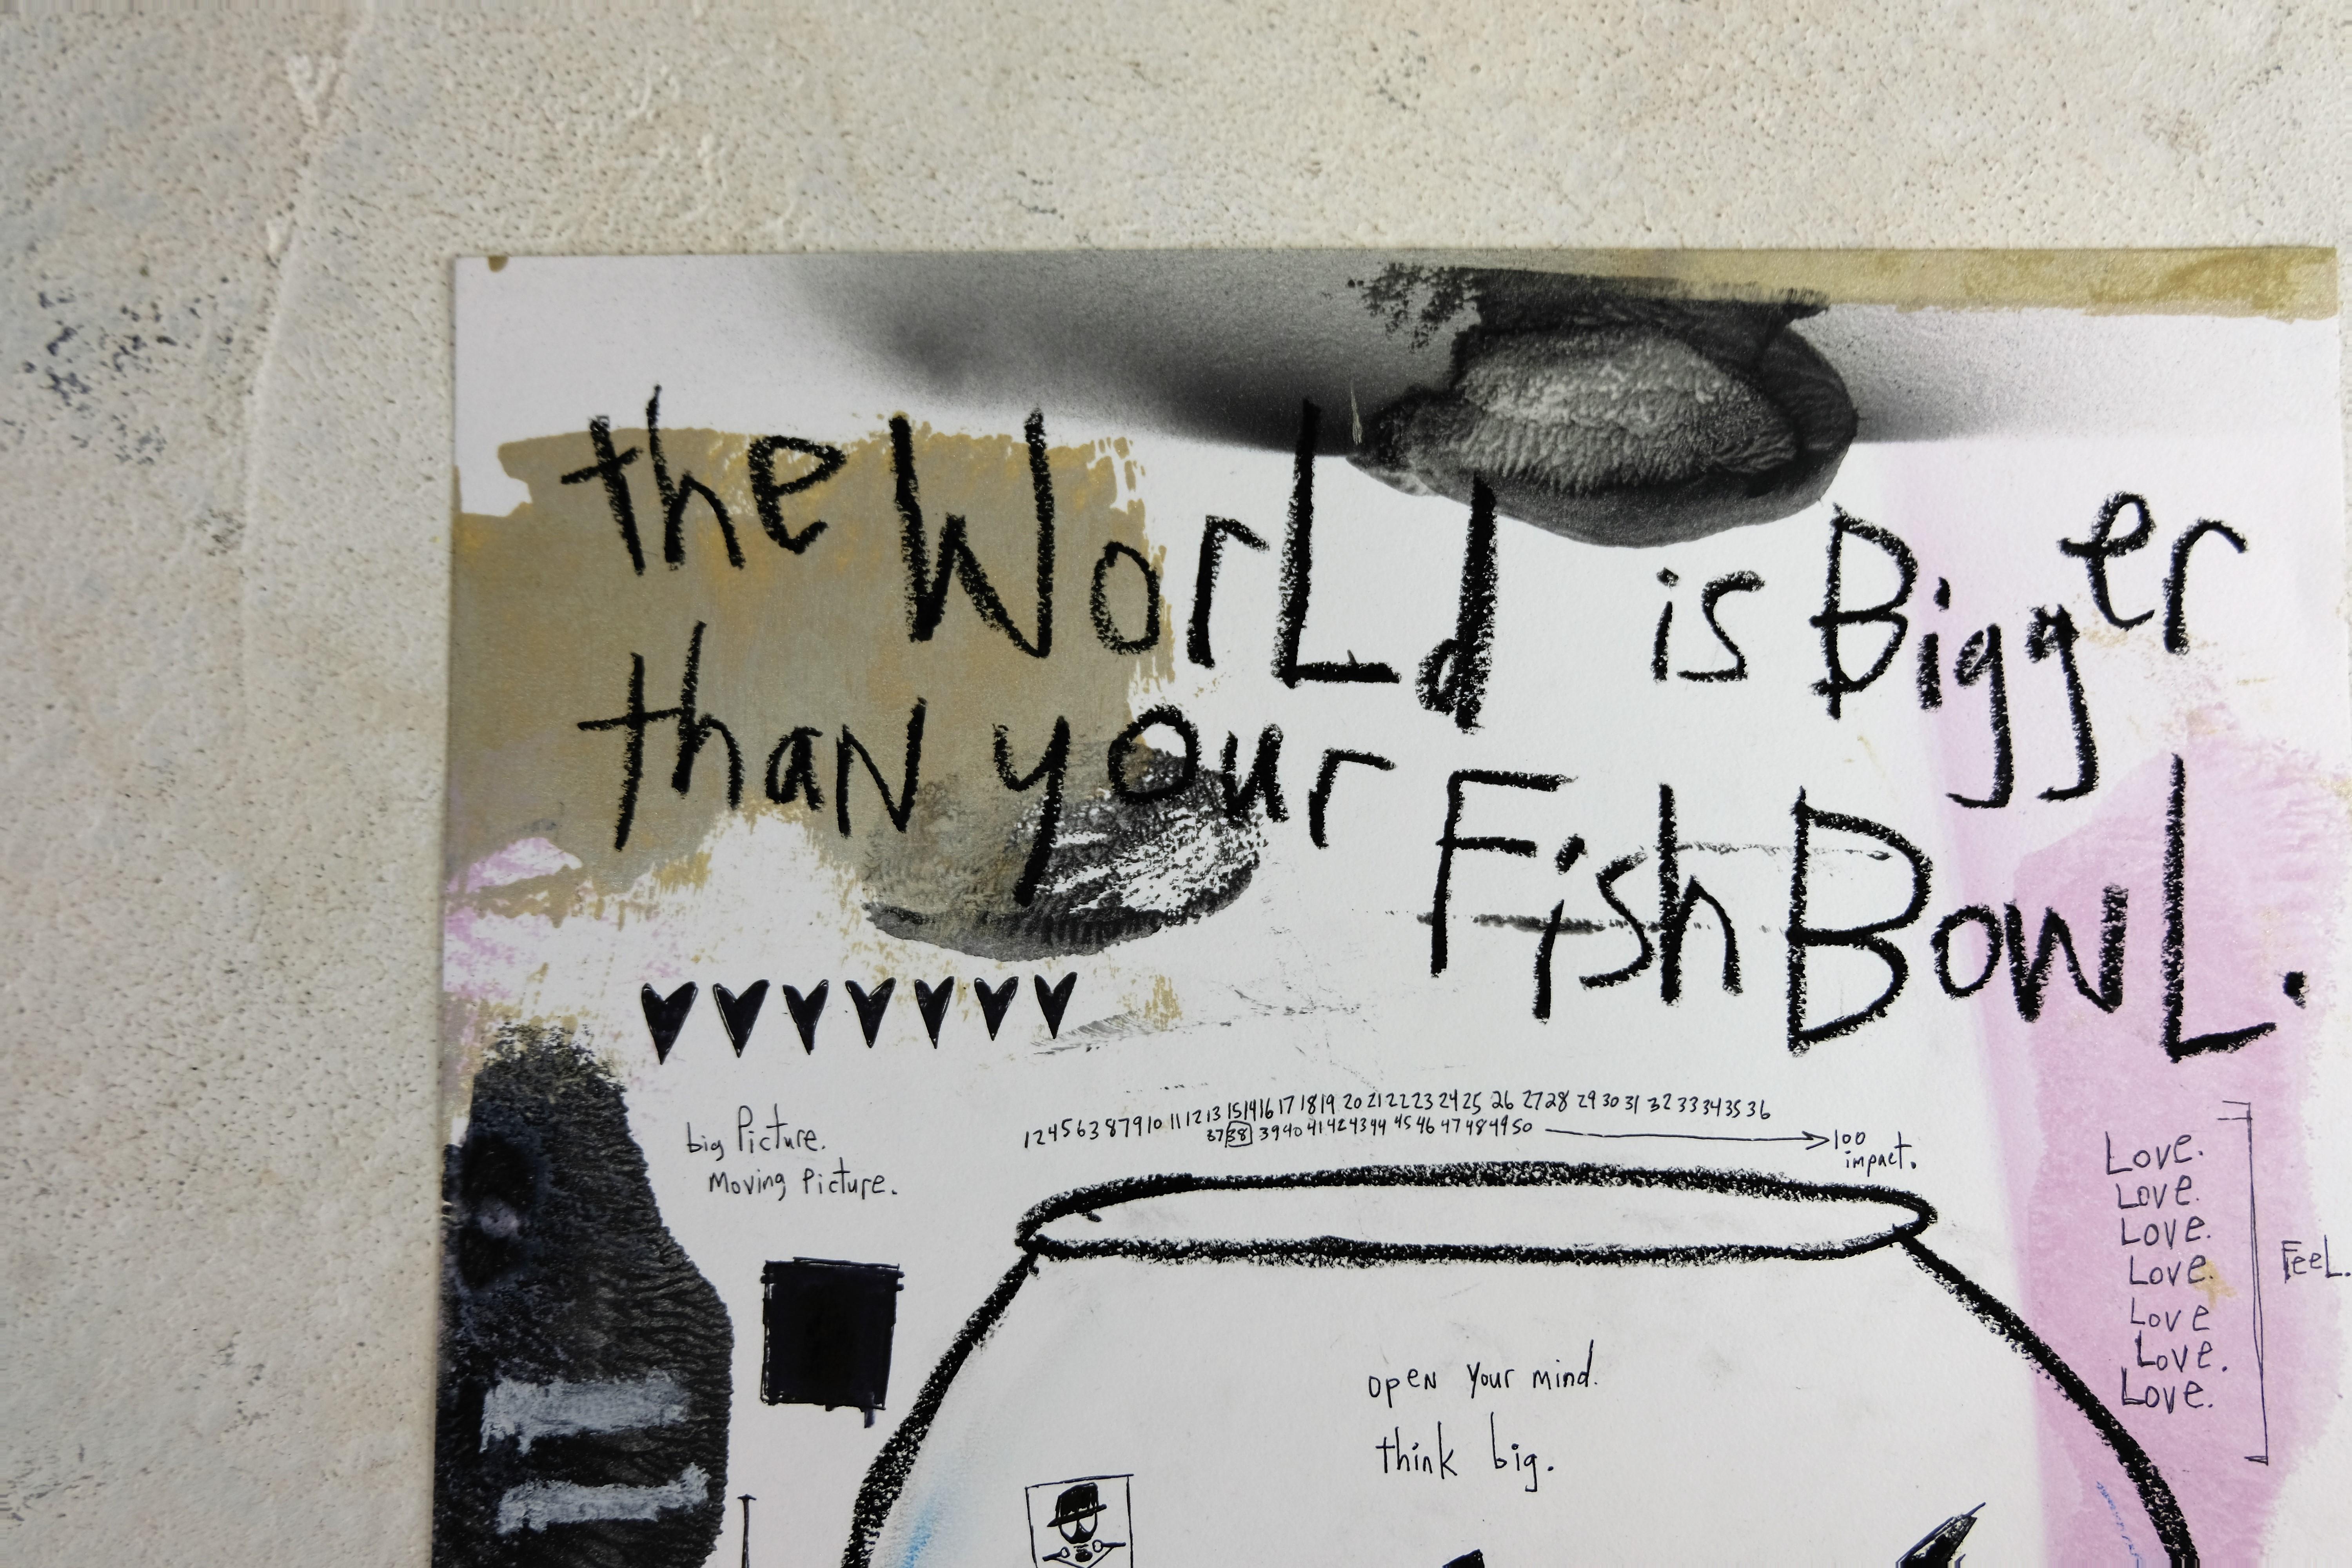 The World is Brighter Than Your Fishbowl
Mixed Media on Paper
Graffiti / Street Art influenced.

About the artist:
Adam Baranello is a multi- media artist who has been making music and art professionally since 2005 under his own label, AJB